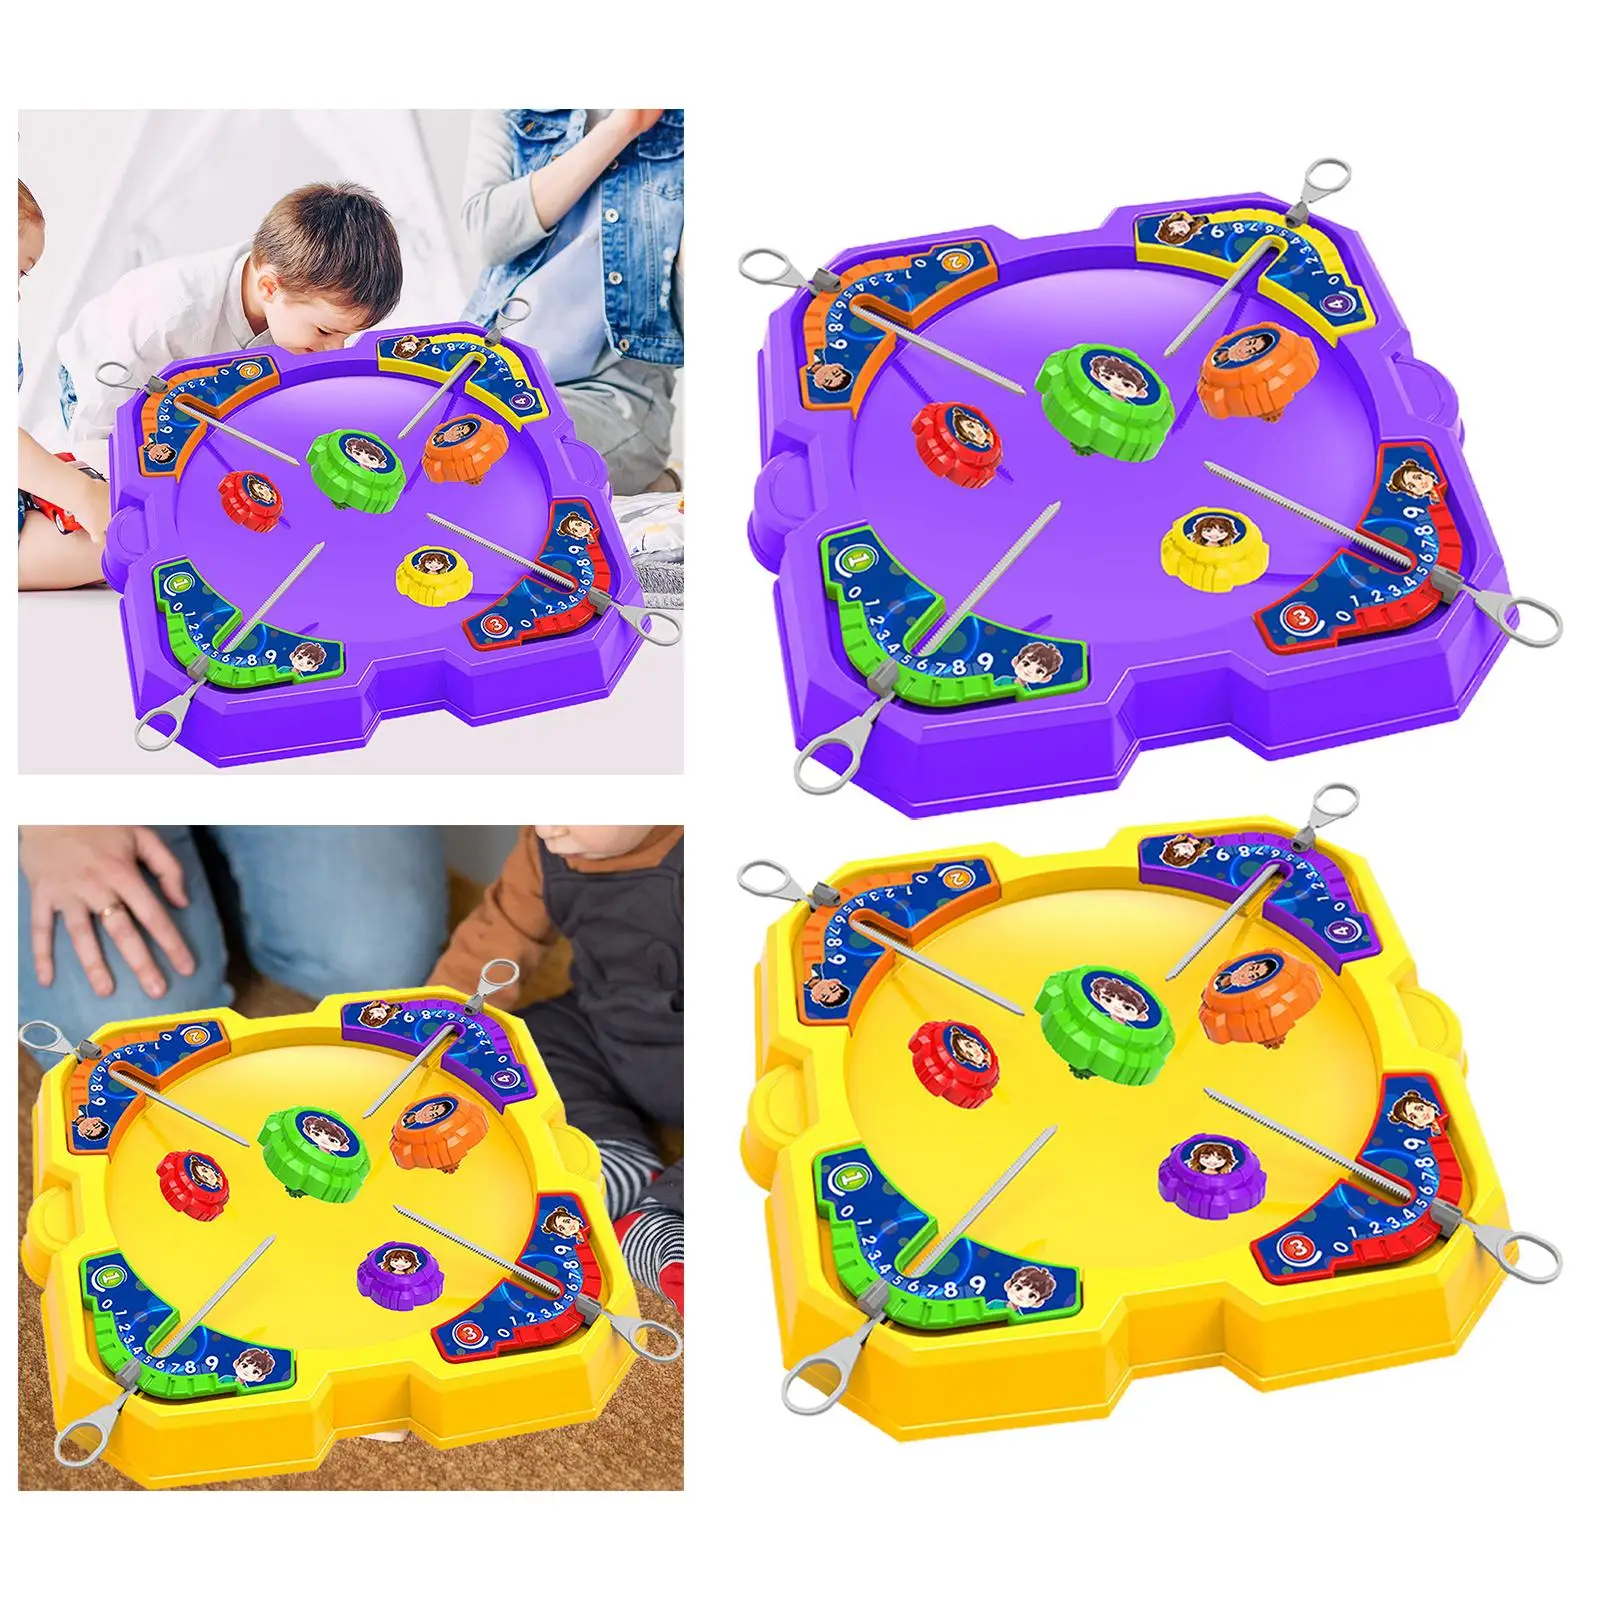 Gyro Toy Wear Resistant Activity Toy for Kindergarten Holiday Girls Boys